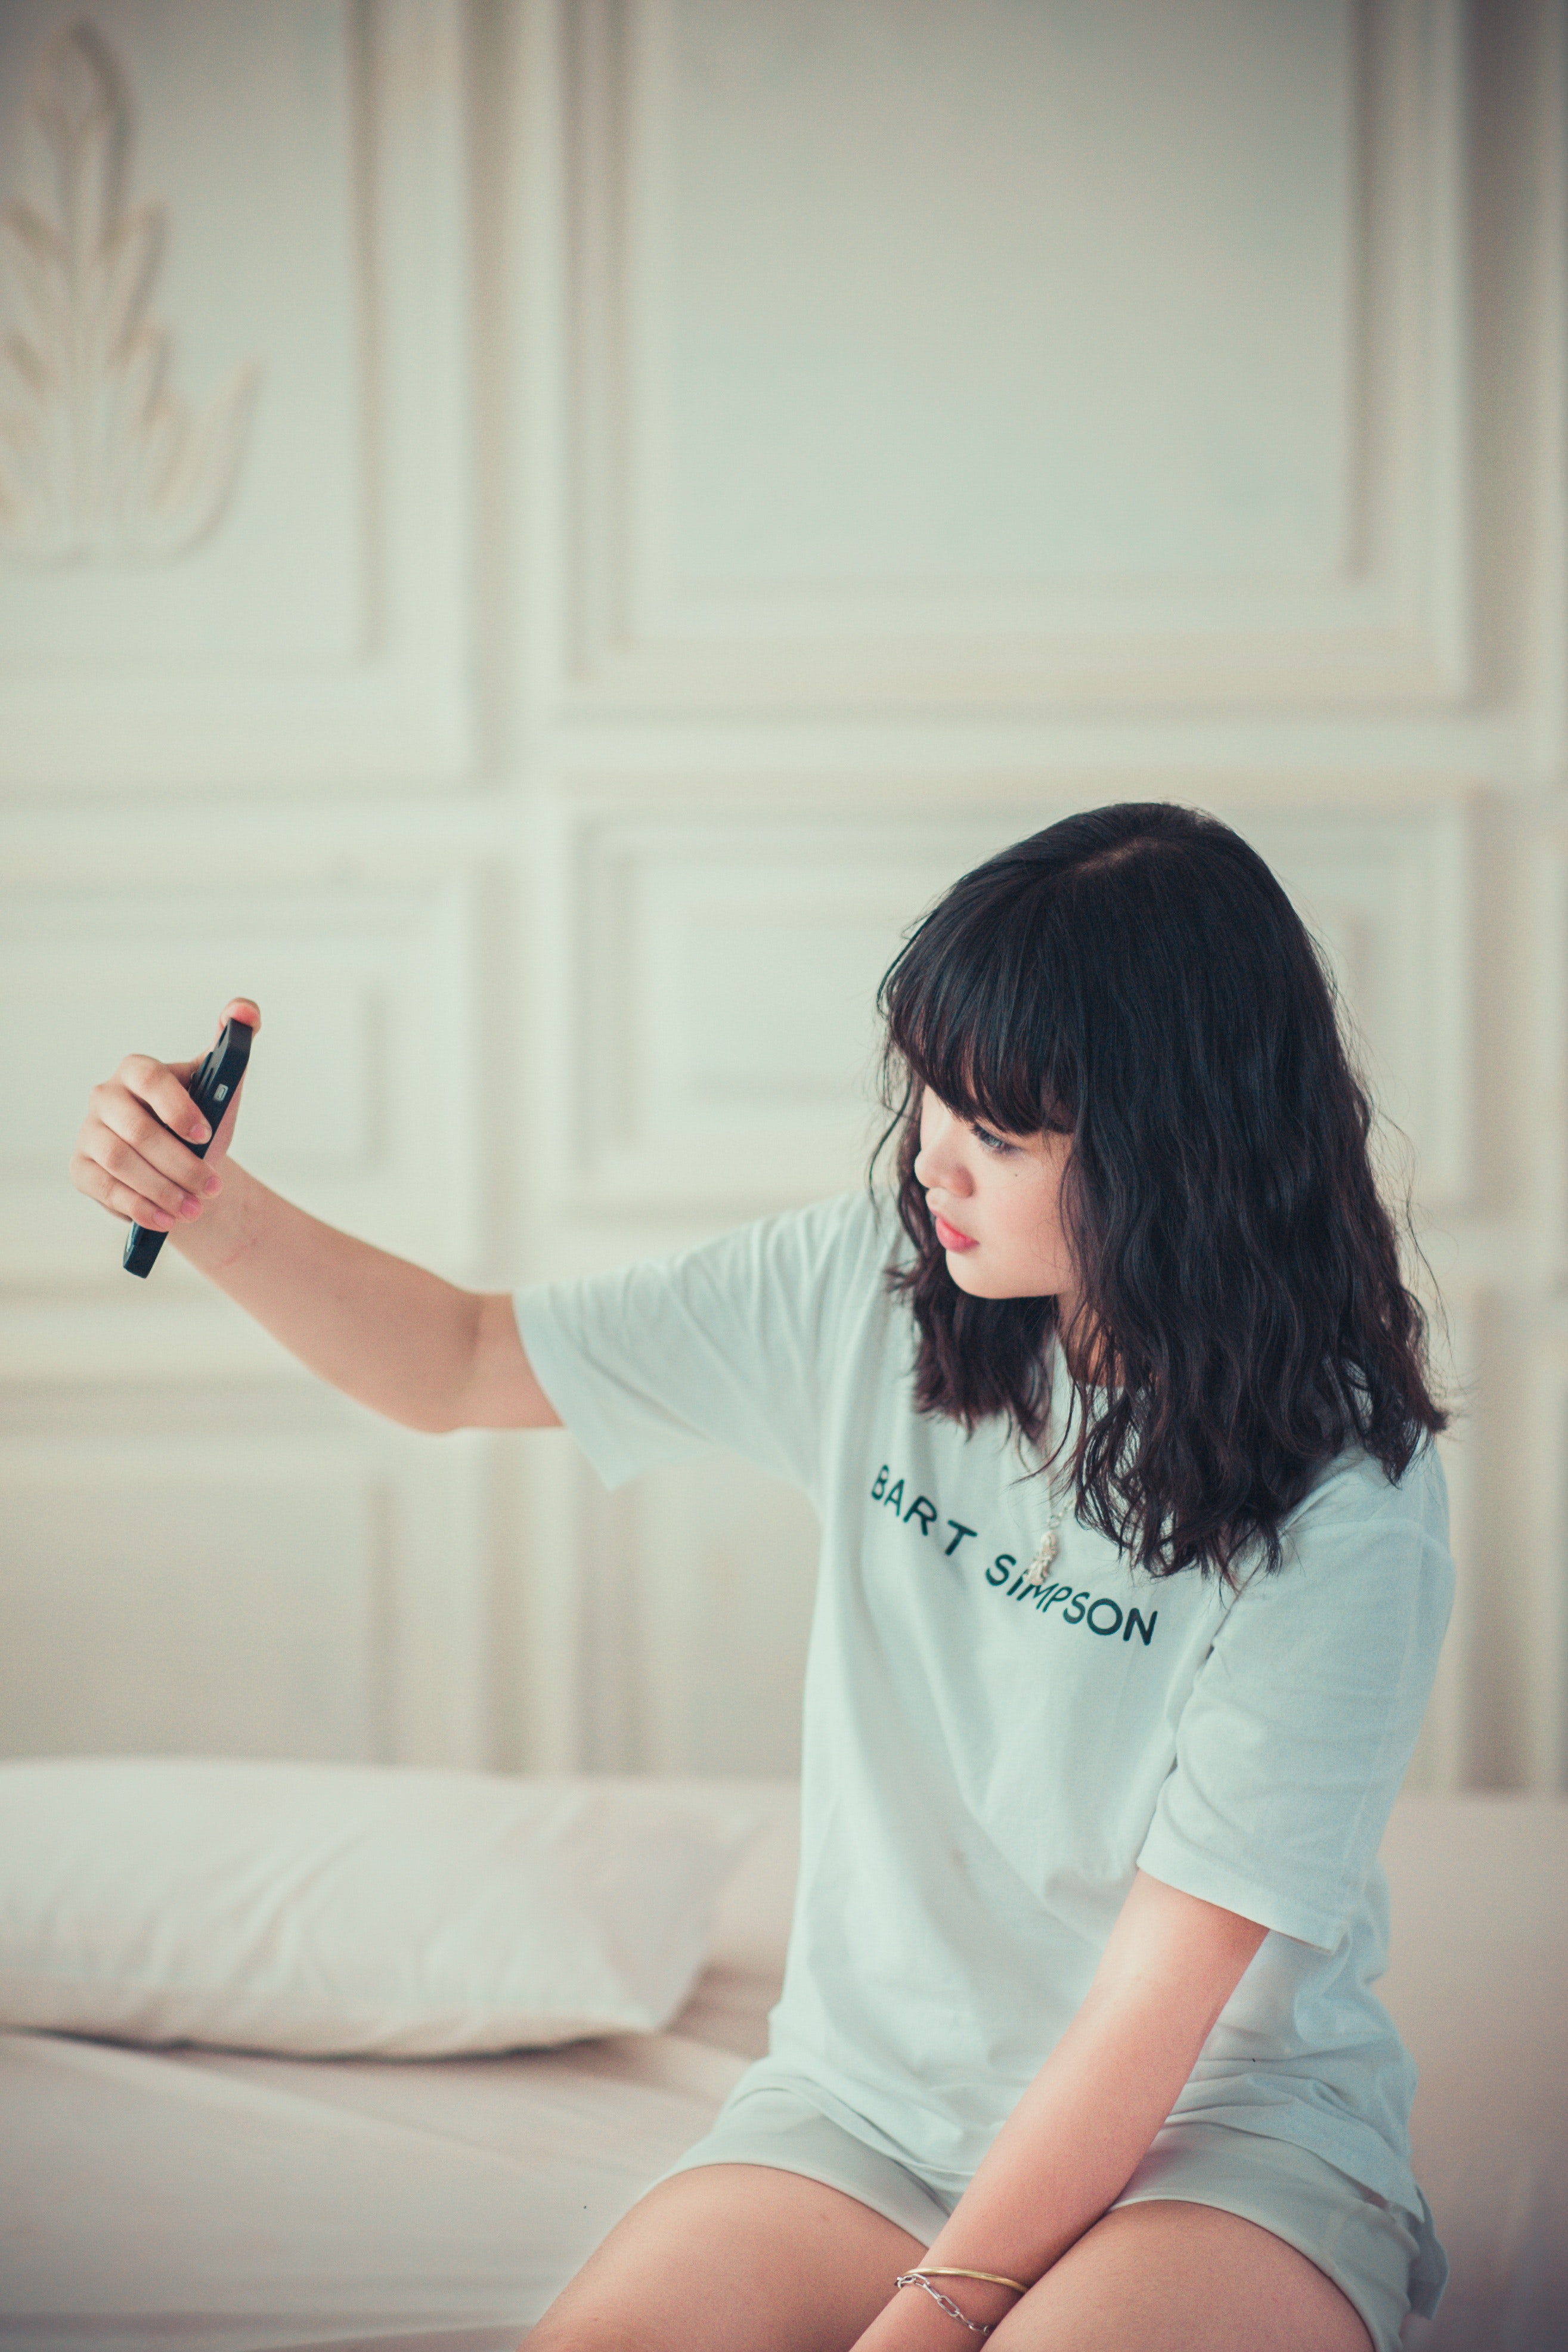 Girl in Blue Crew Neck Shirt Using Her Mobile Phone Indoors, Bed, Relaxation, Room, Selfie, HQ Photo